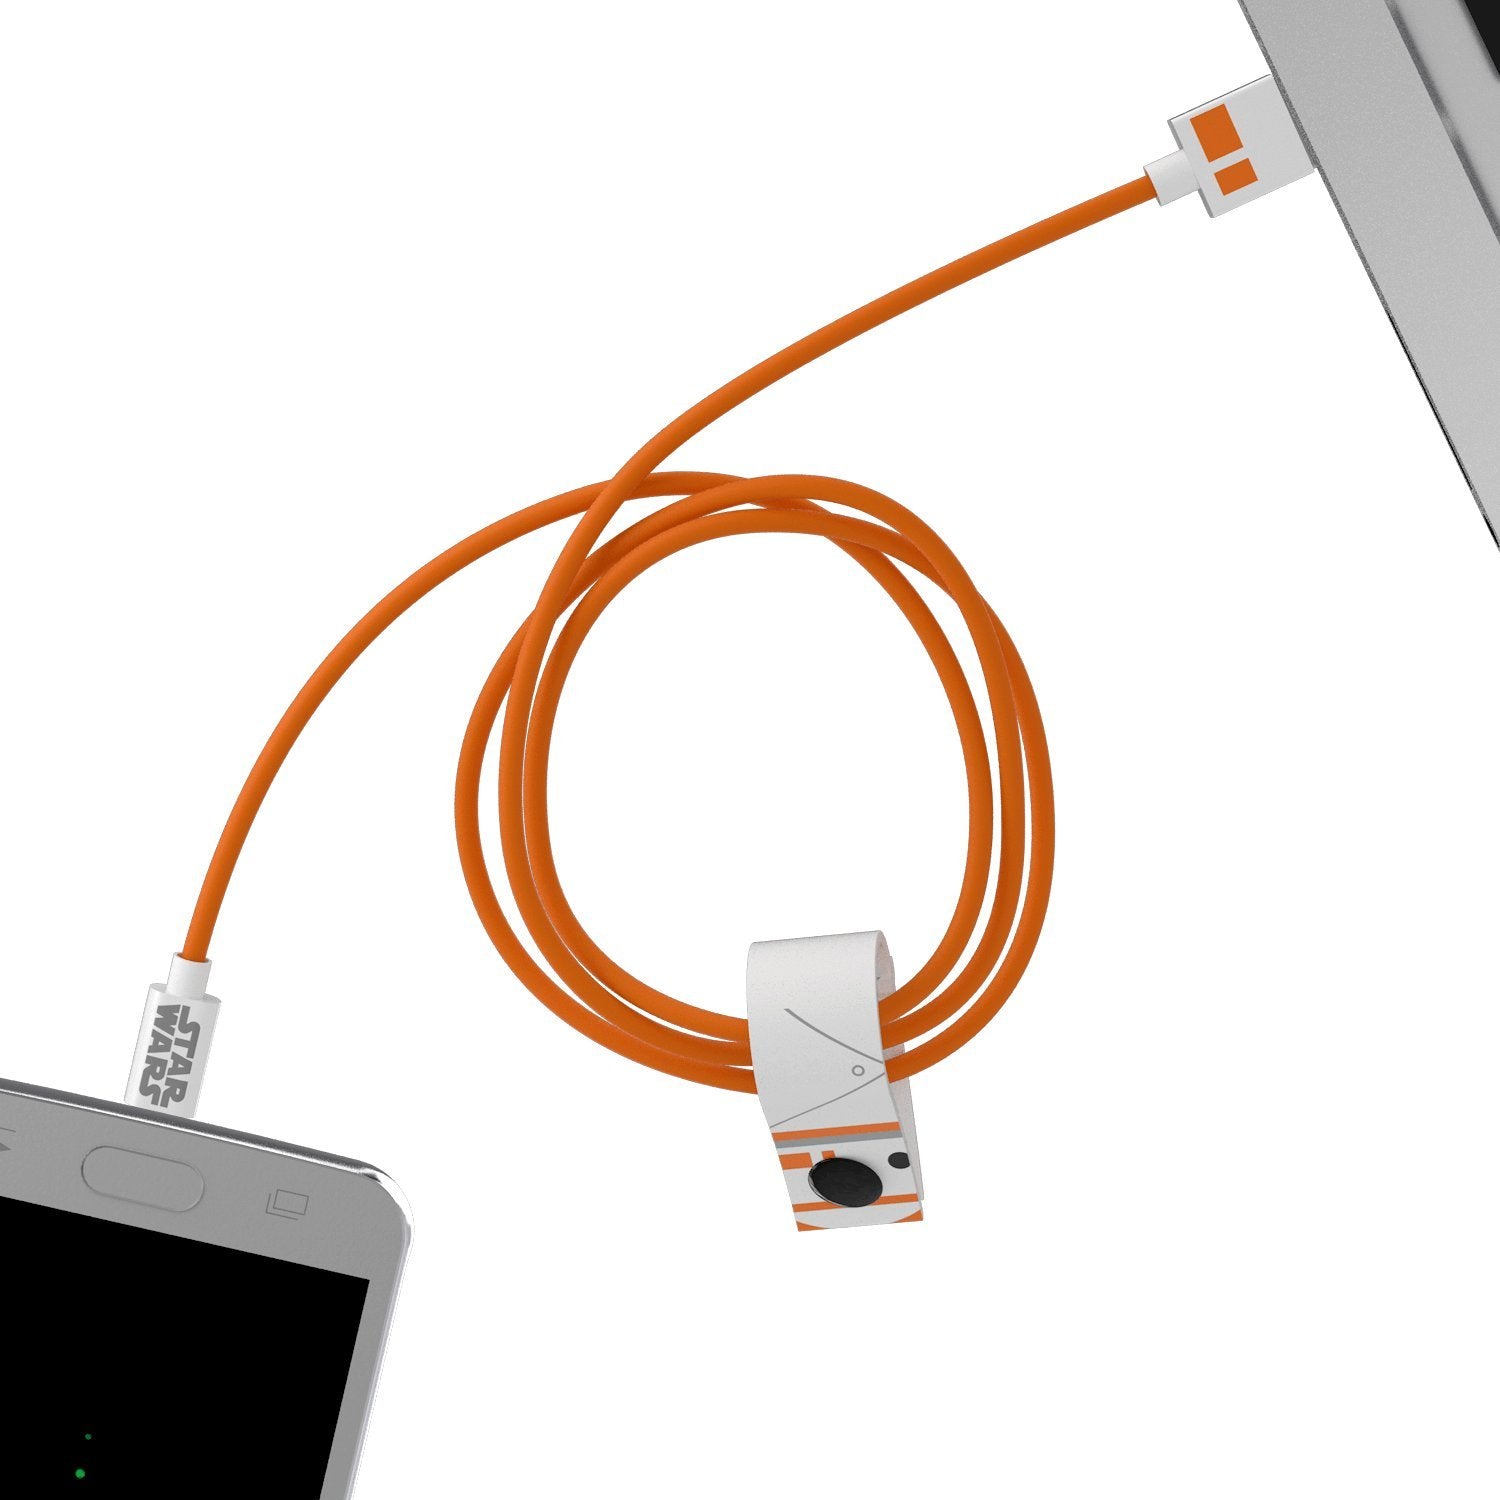 Cable iPhone USB a Lightning Tribe Star Wars 1.20 - BB8